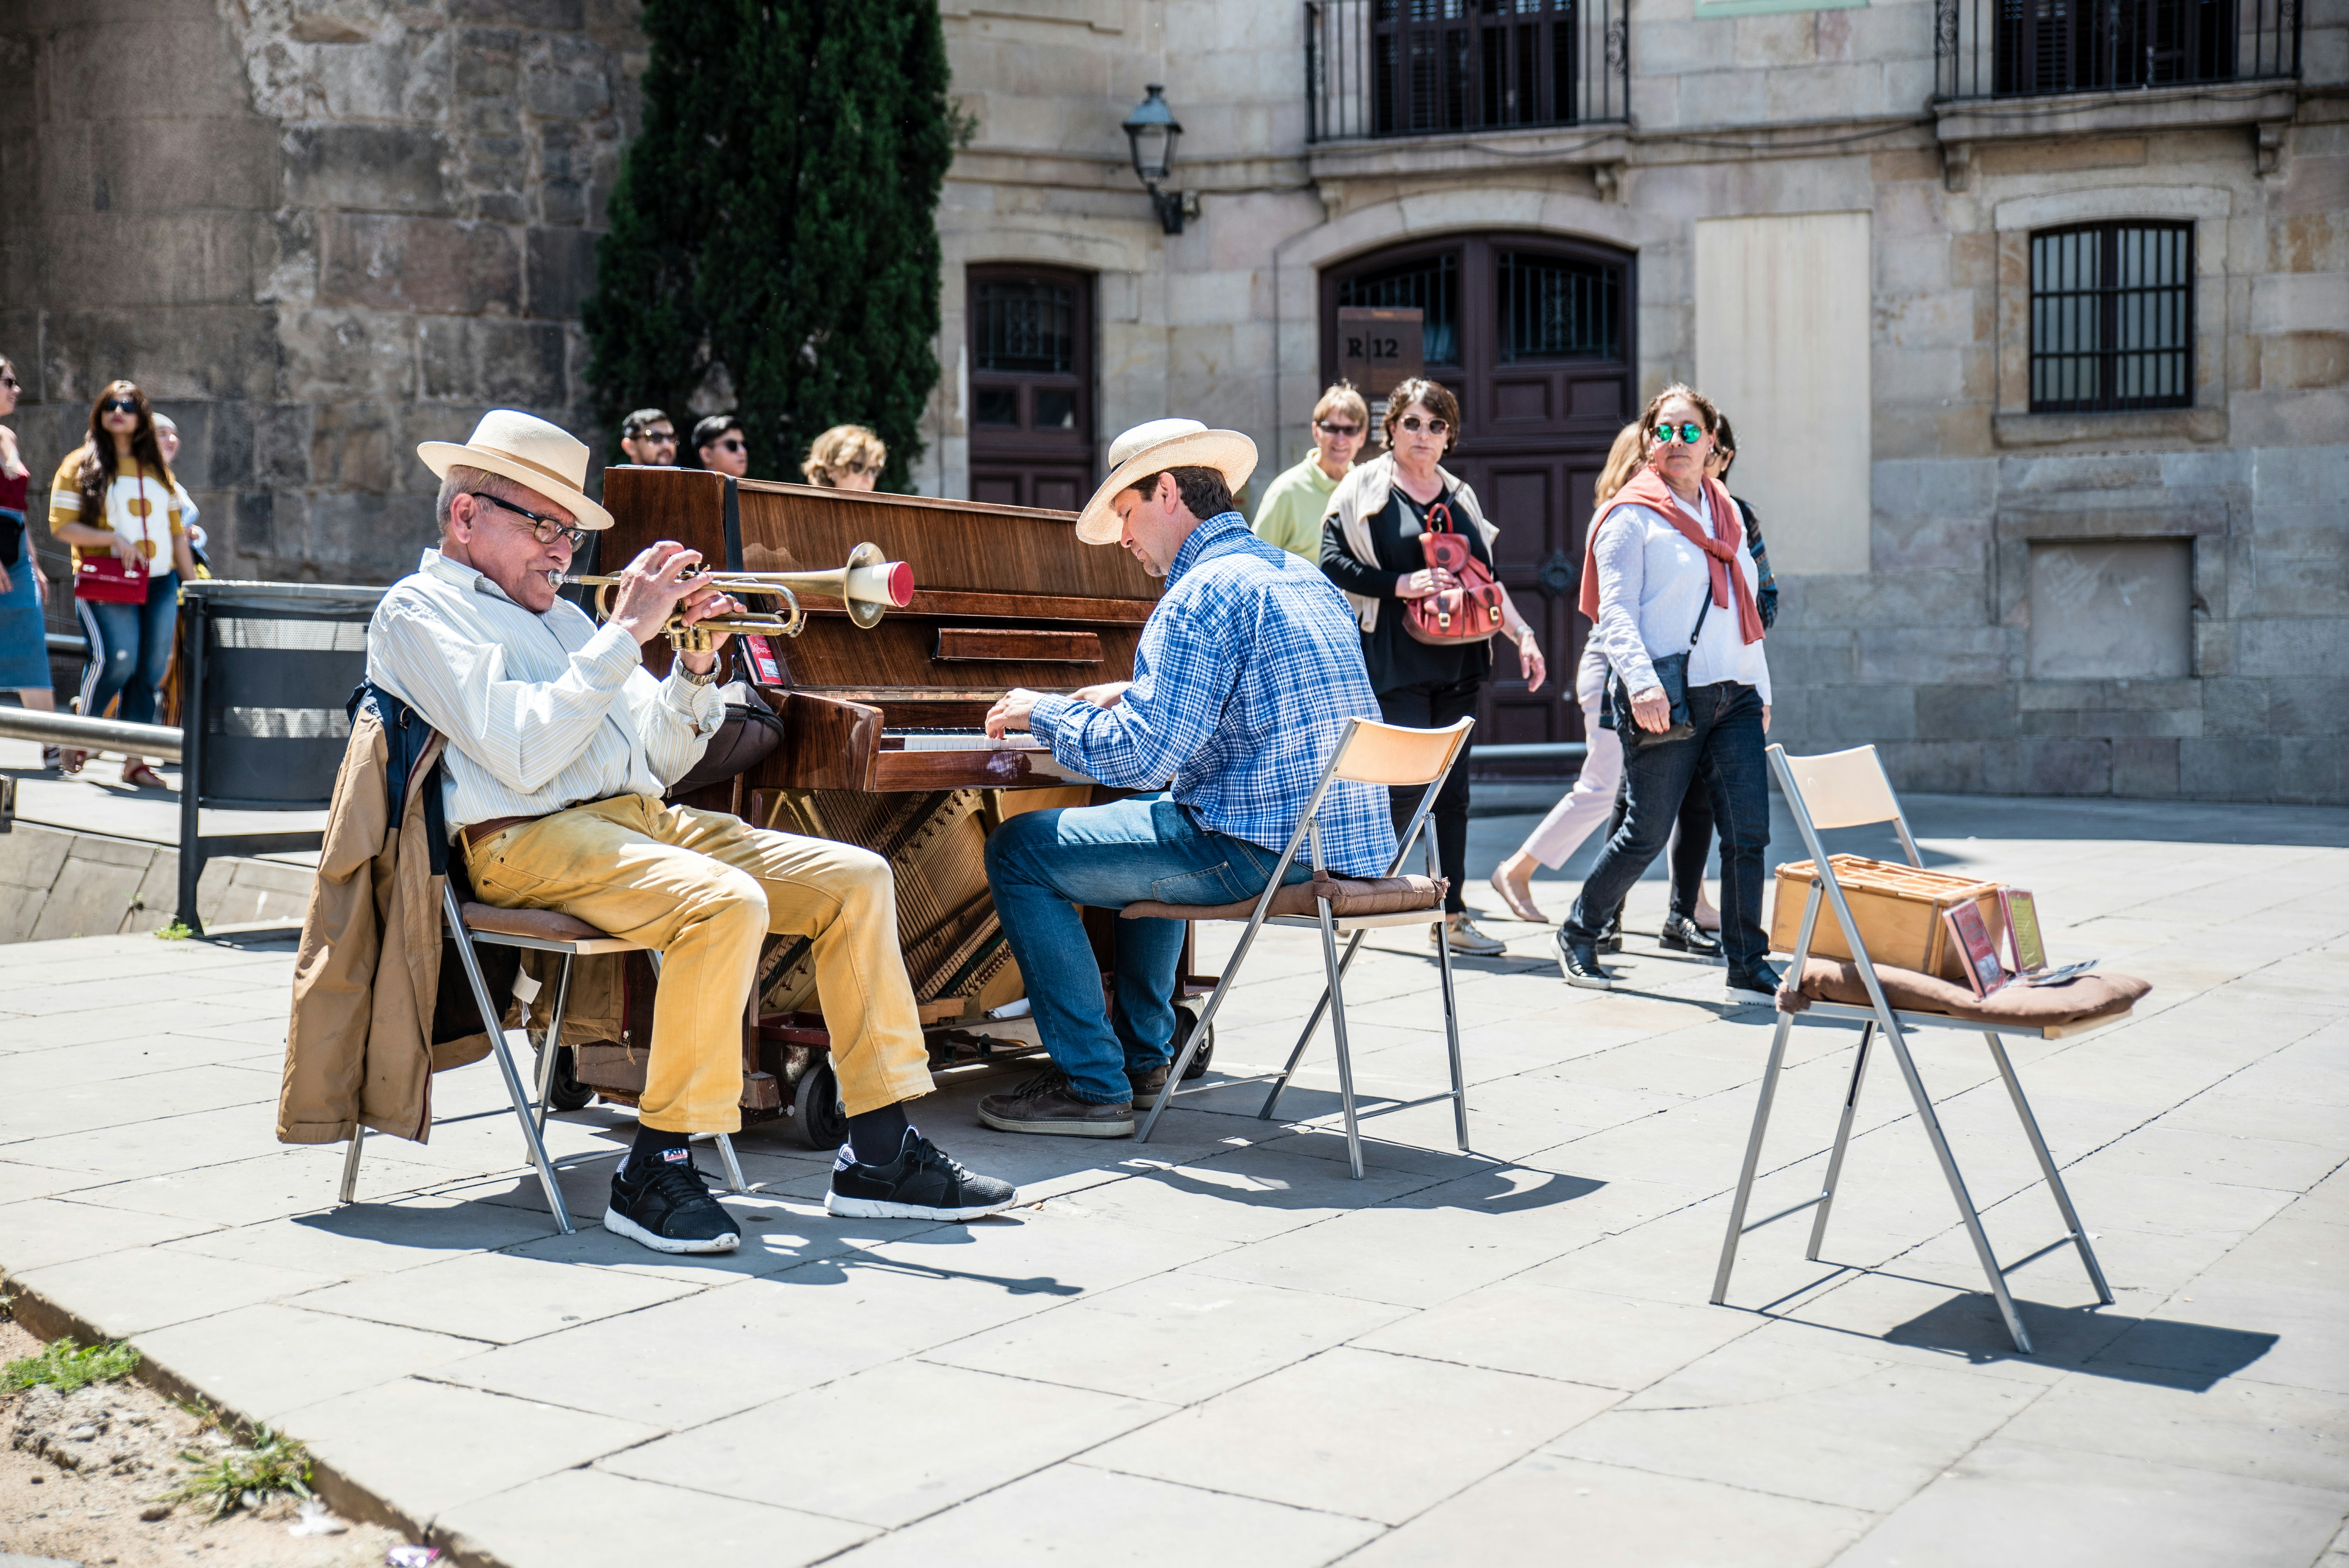 Street music in the cathedral square.